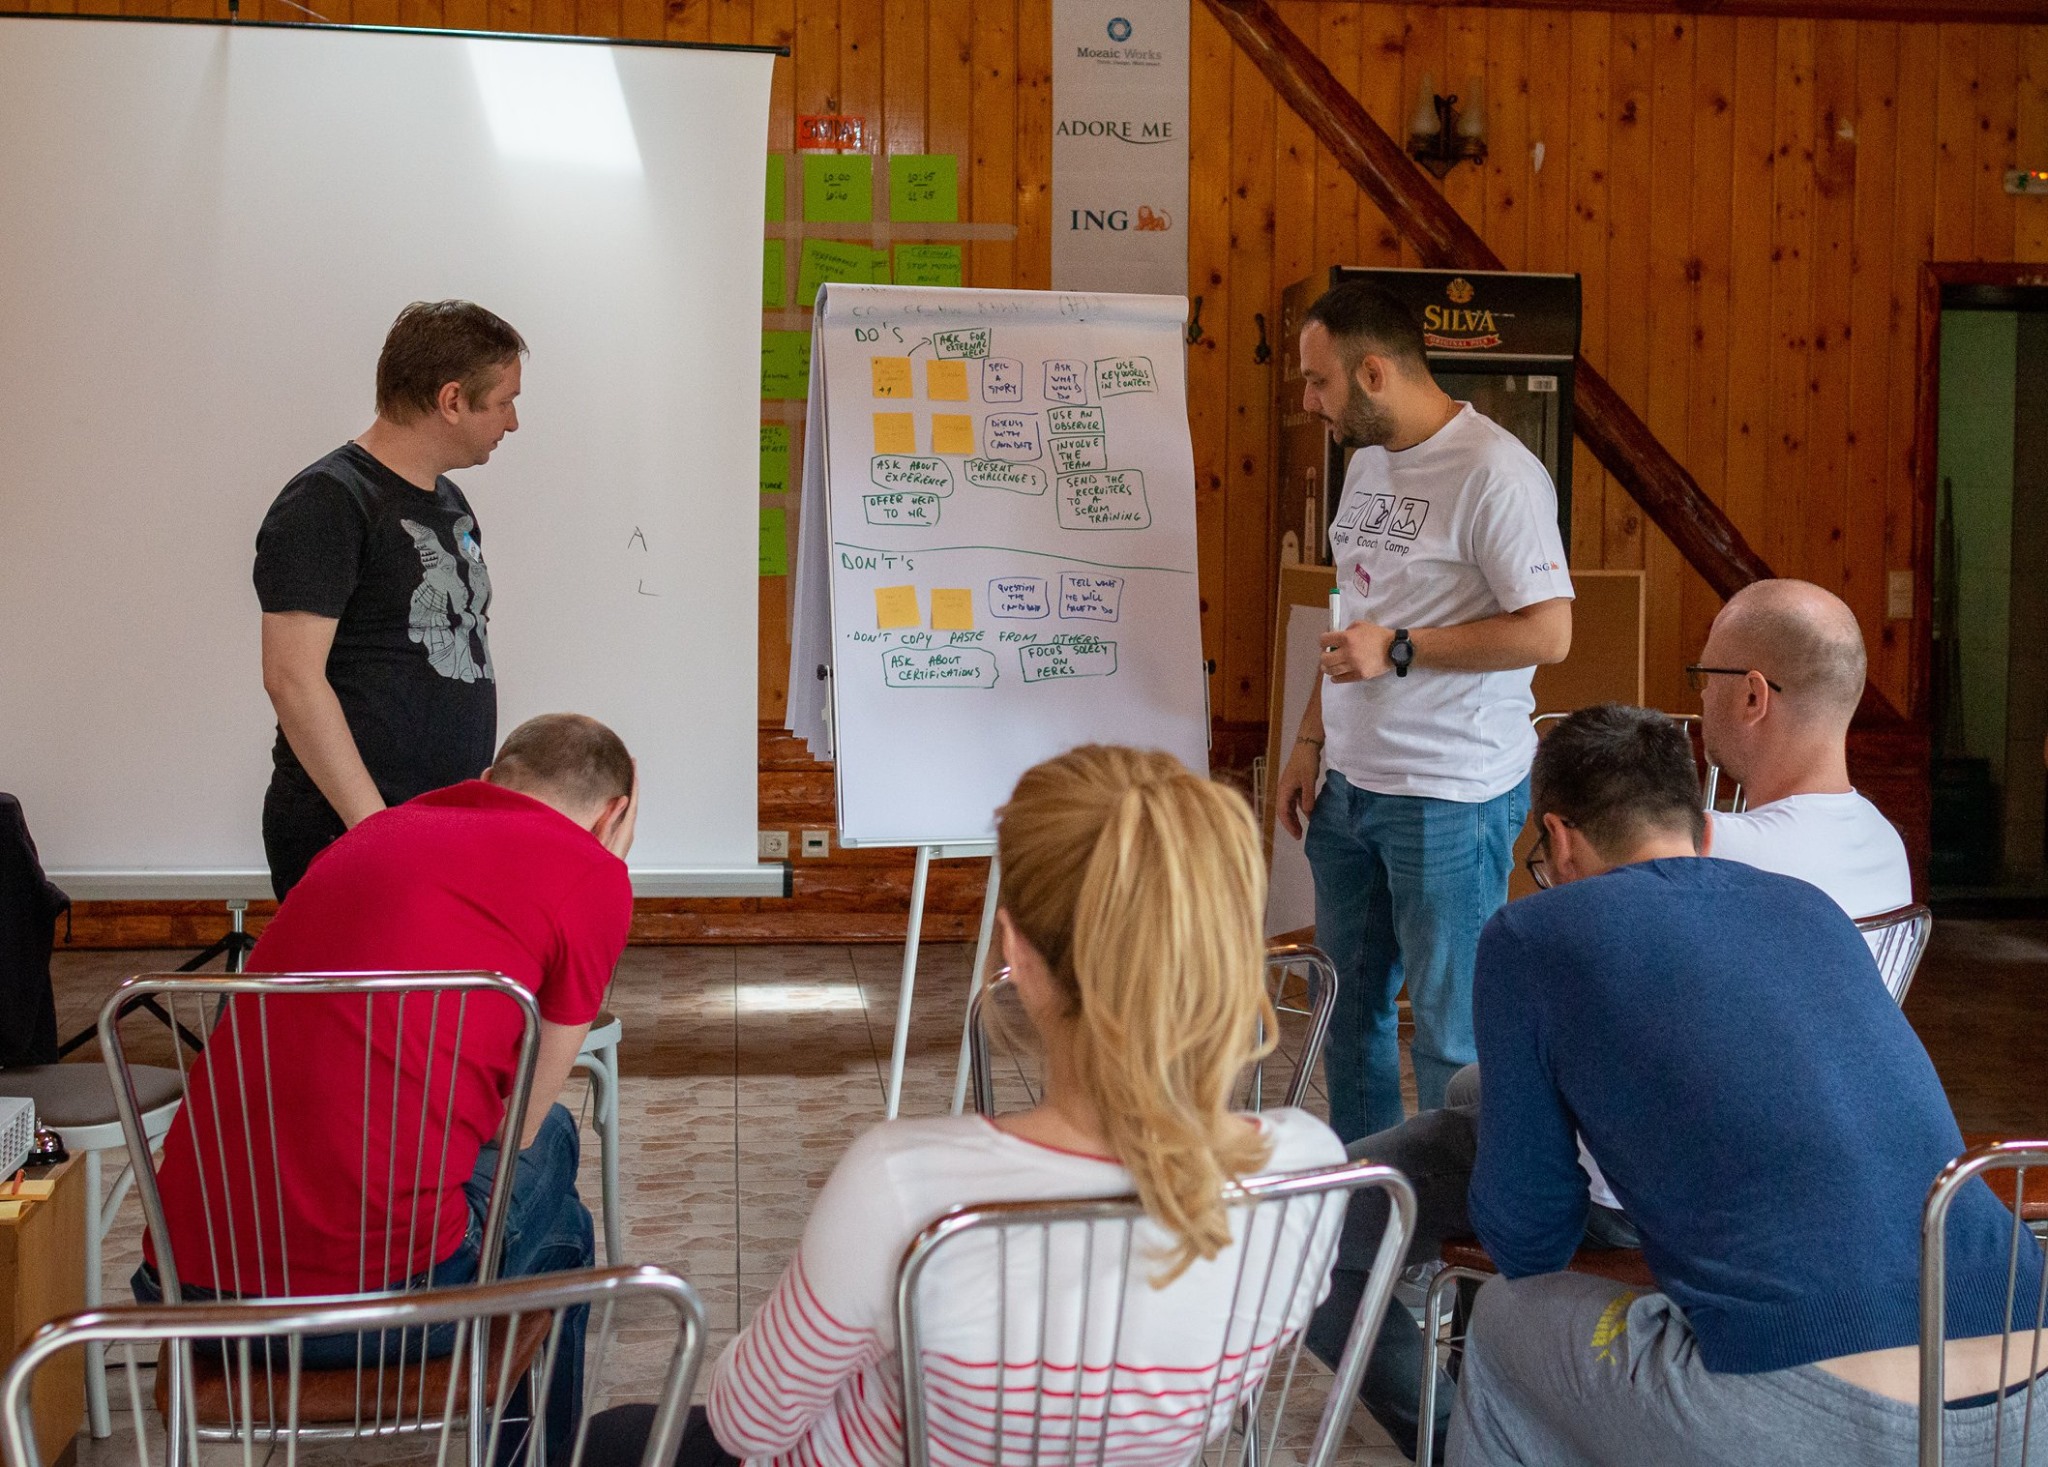 Sessions & workshops - Tips for recruiting Scrum Masters